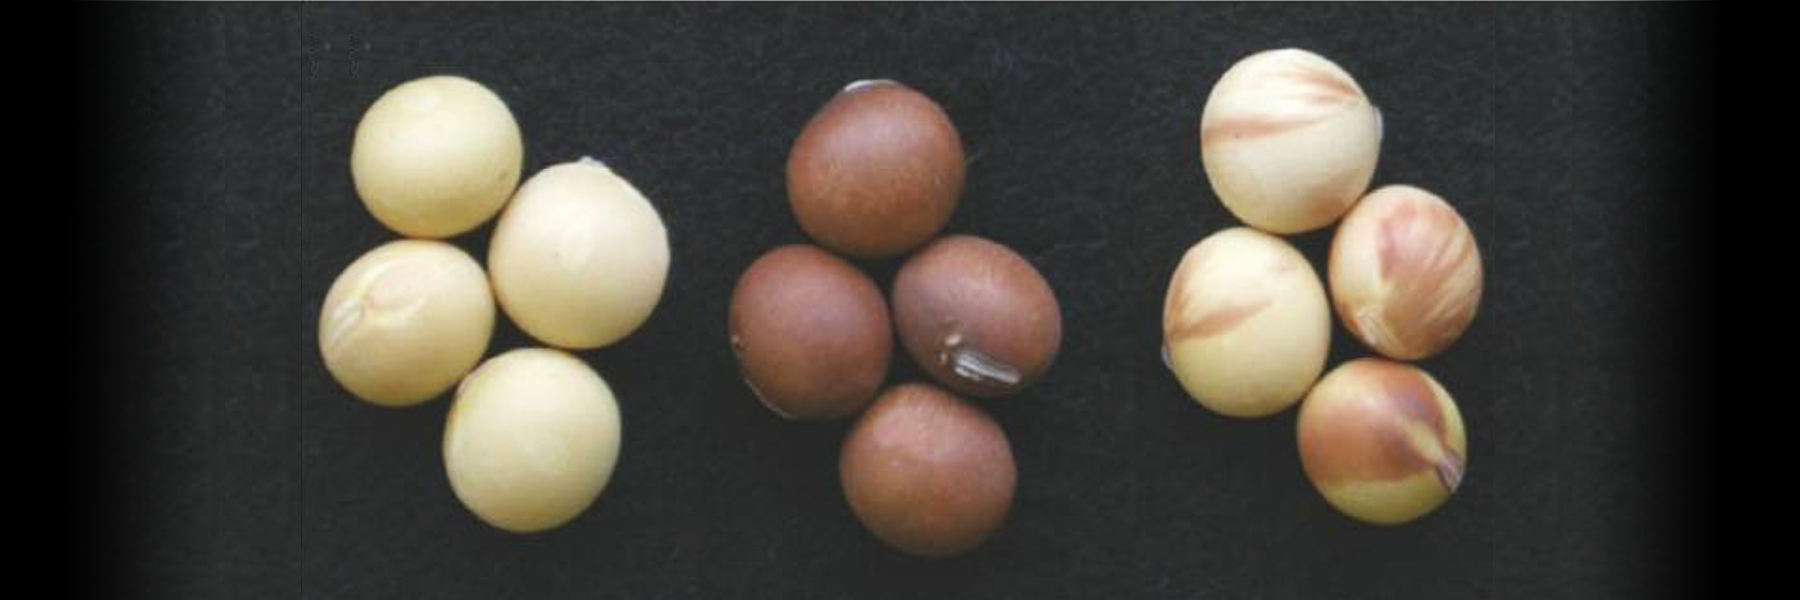 The dark color of soybeans (middle) is extinguished in cultivated varieties (left) because of natural posttranscriptional silencing of the CHS gene and can be partially reversed by infection of the parental plant with a virus possessing a PTGS suppressor protein, producing a mottled pattern (right).